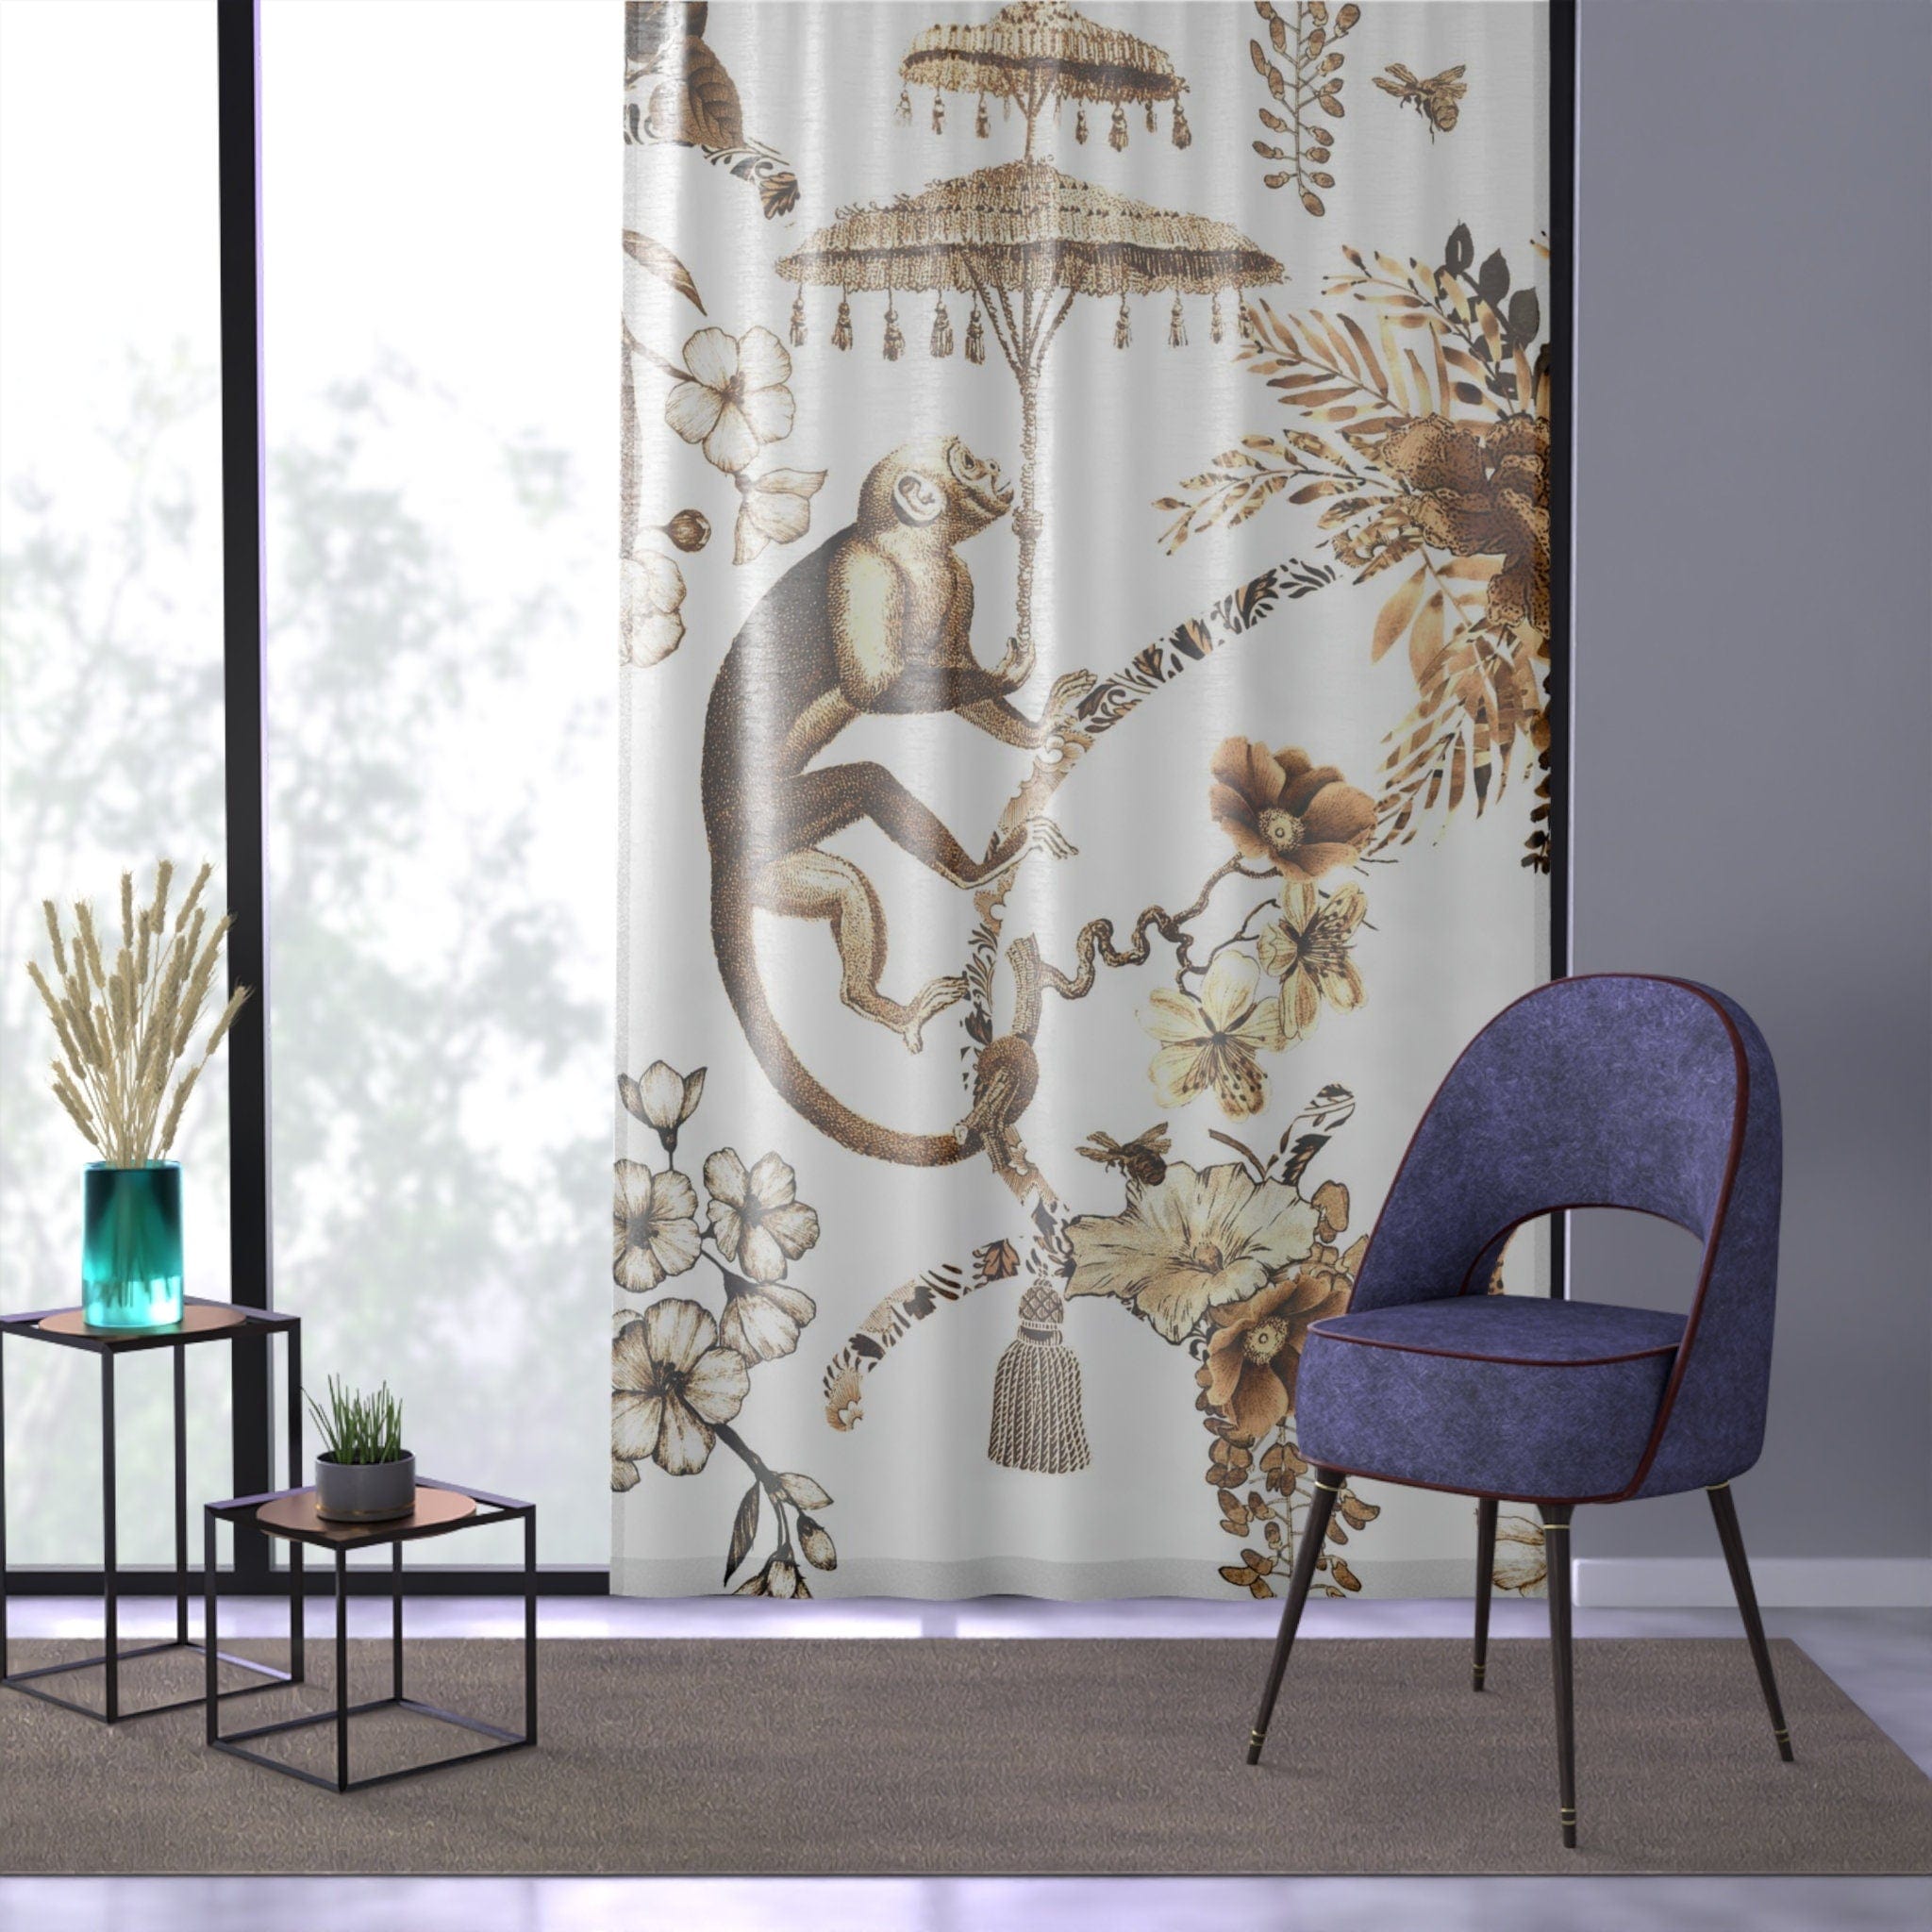 Kate McEnroe New York Chinoiserie Jungle Botanical Toile Window Curtains, Brown, White Chinoiserie Floral Curtain Panels, Country Farmhouse Decor - 122681123 Window Curtains